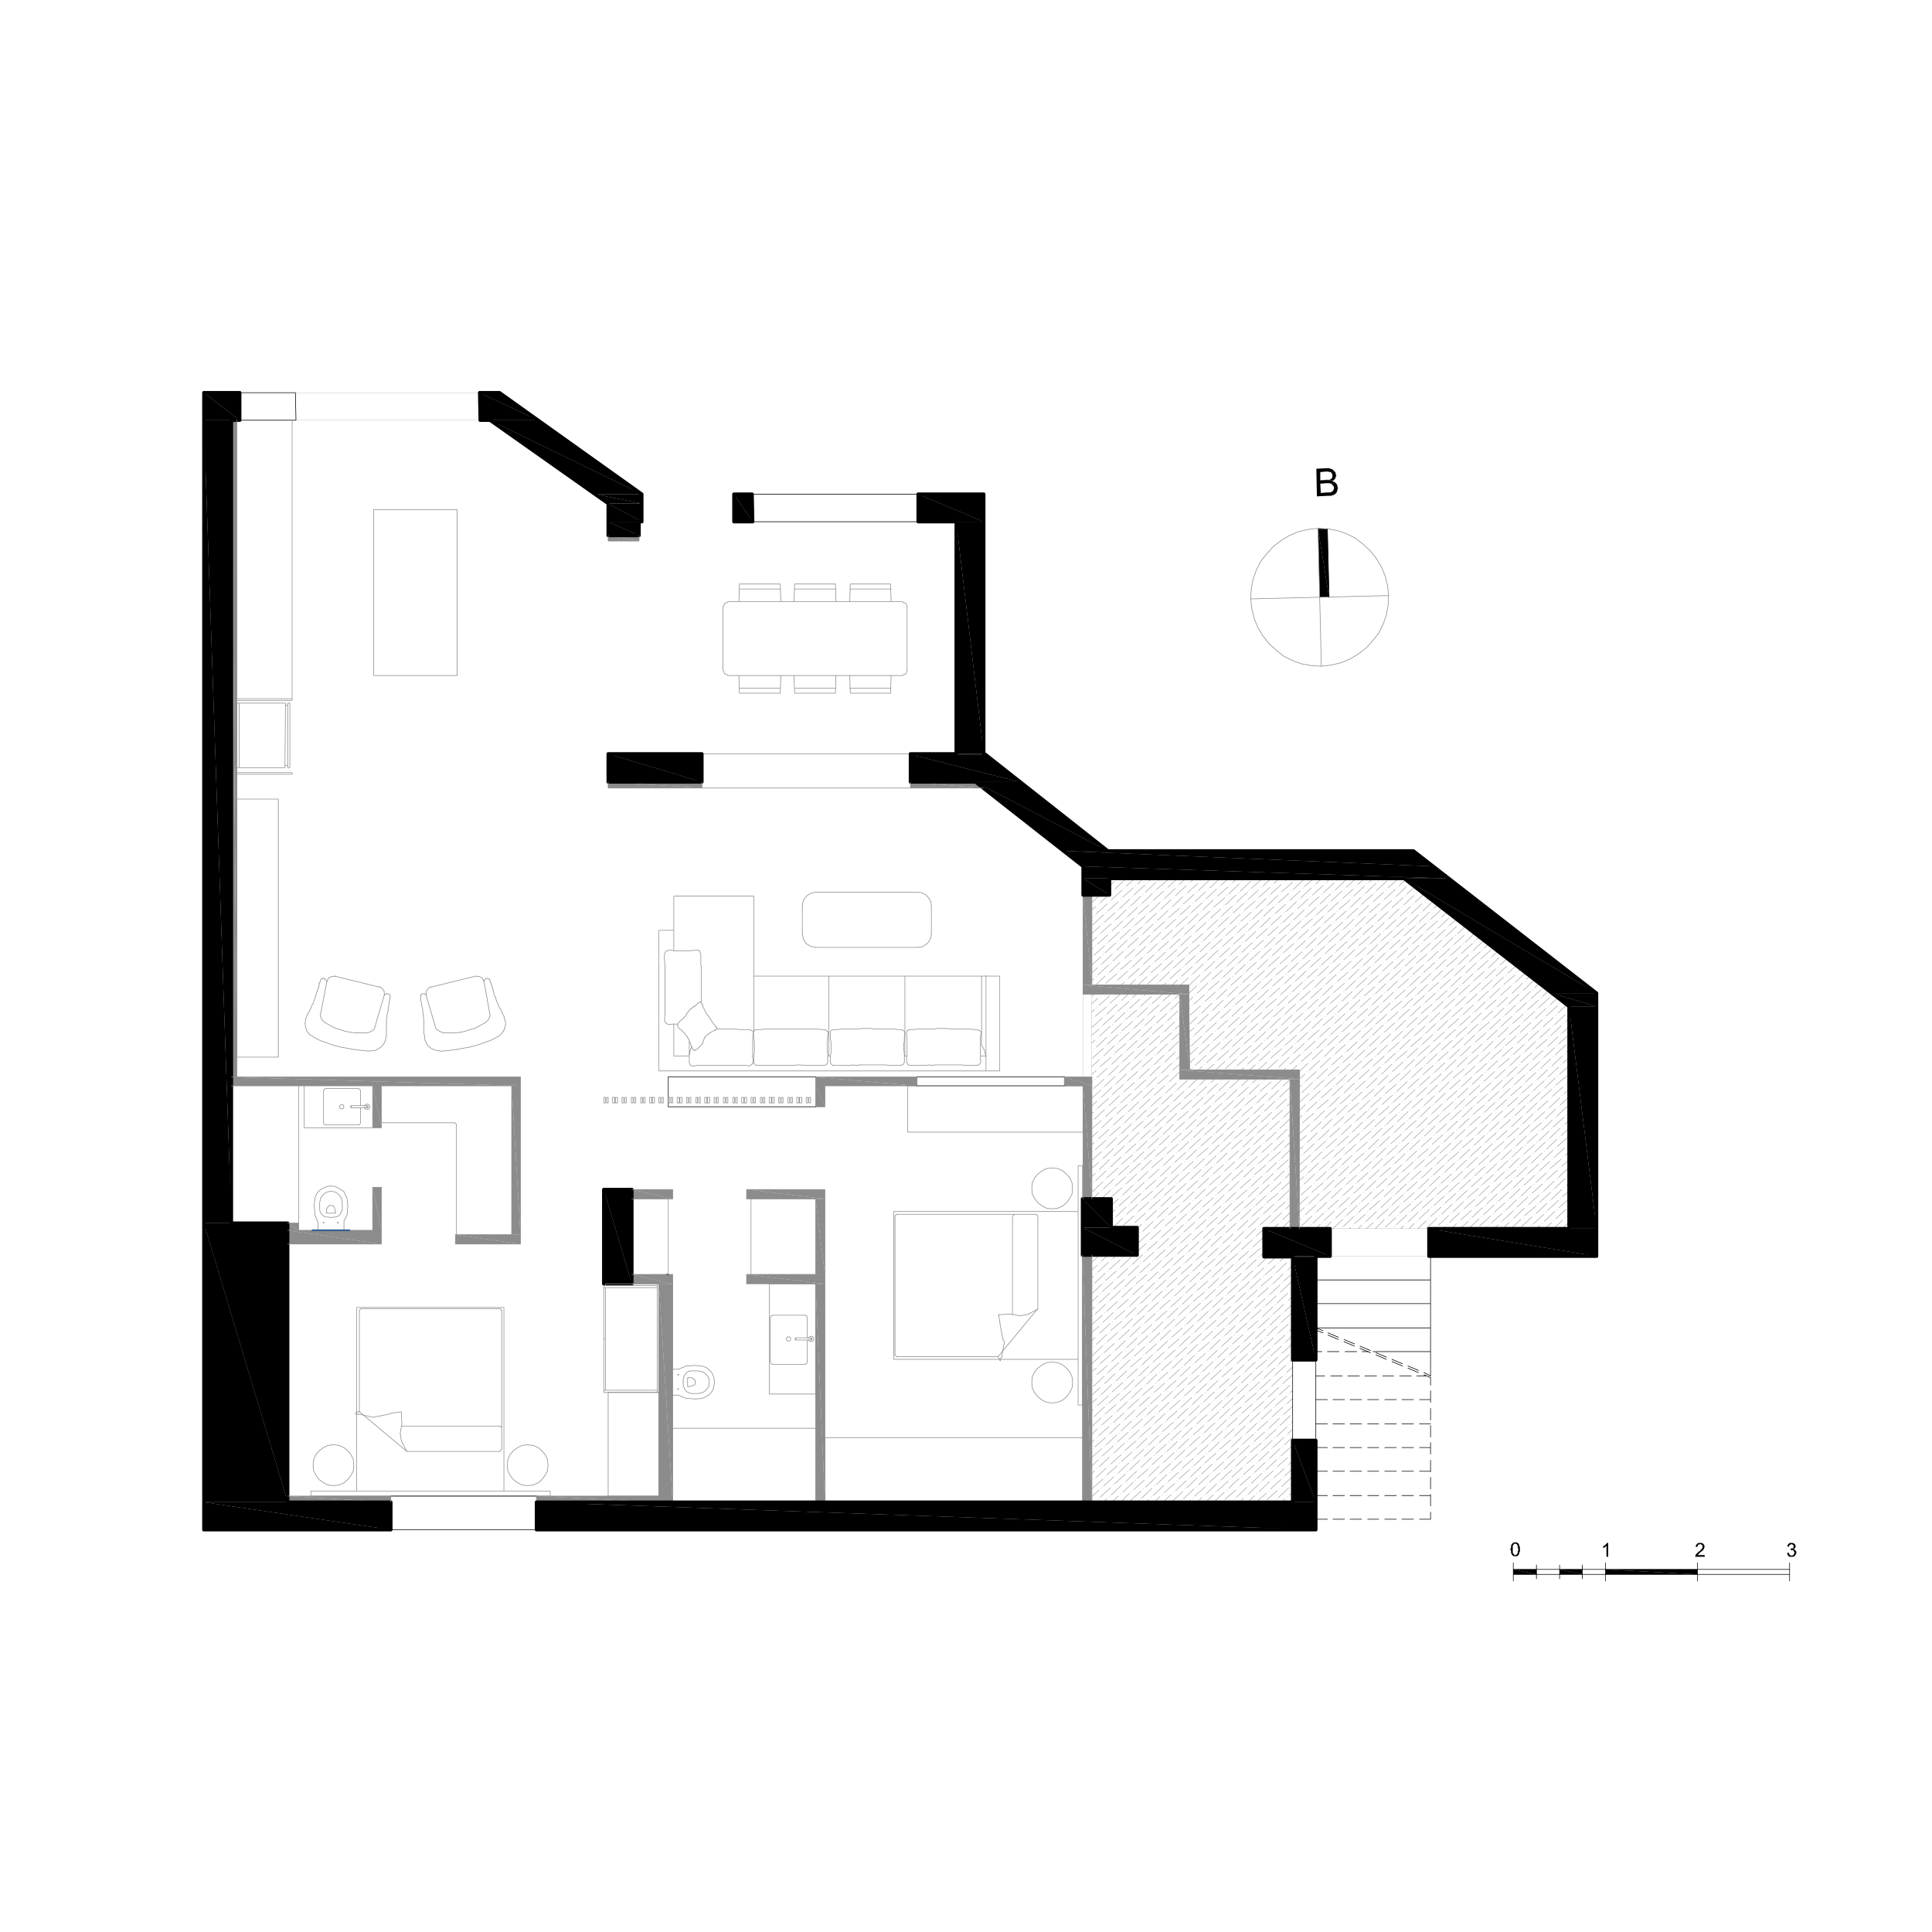 IXNOS Architects apartment in Argioroupoli. Top View Drawing.